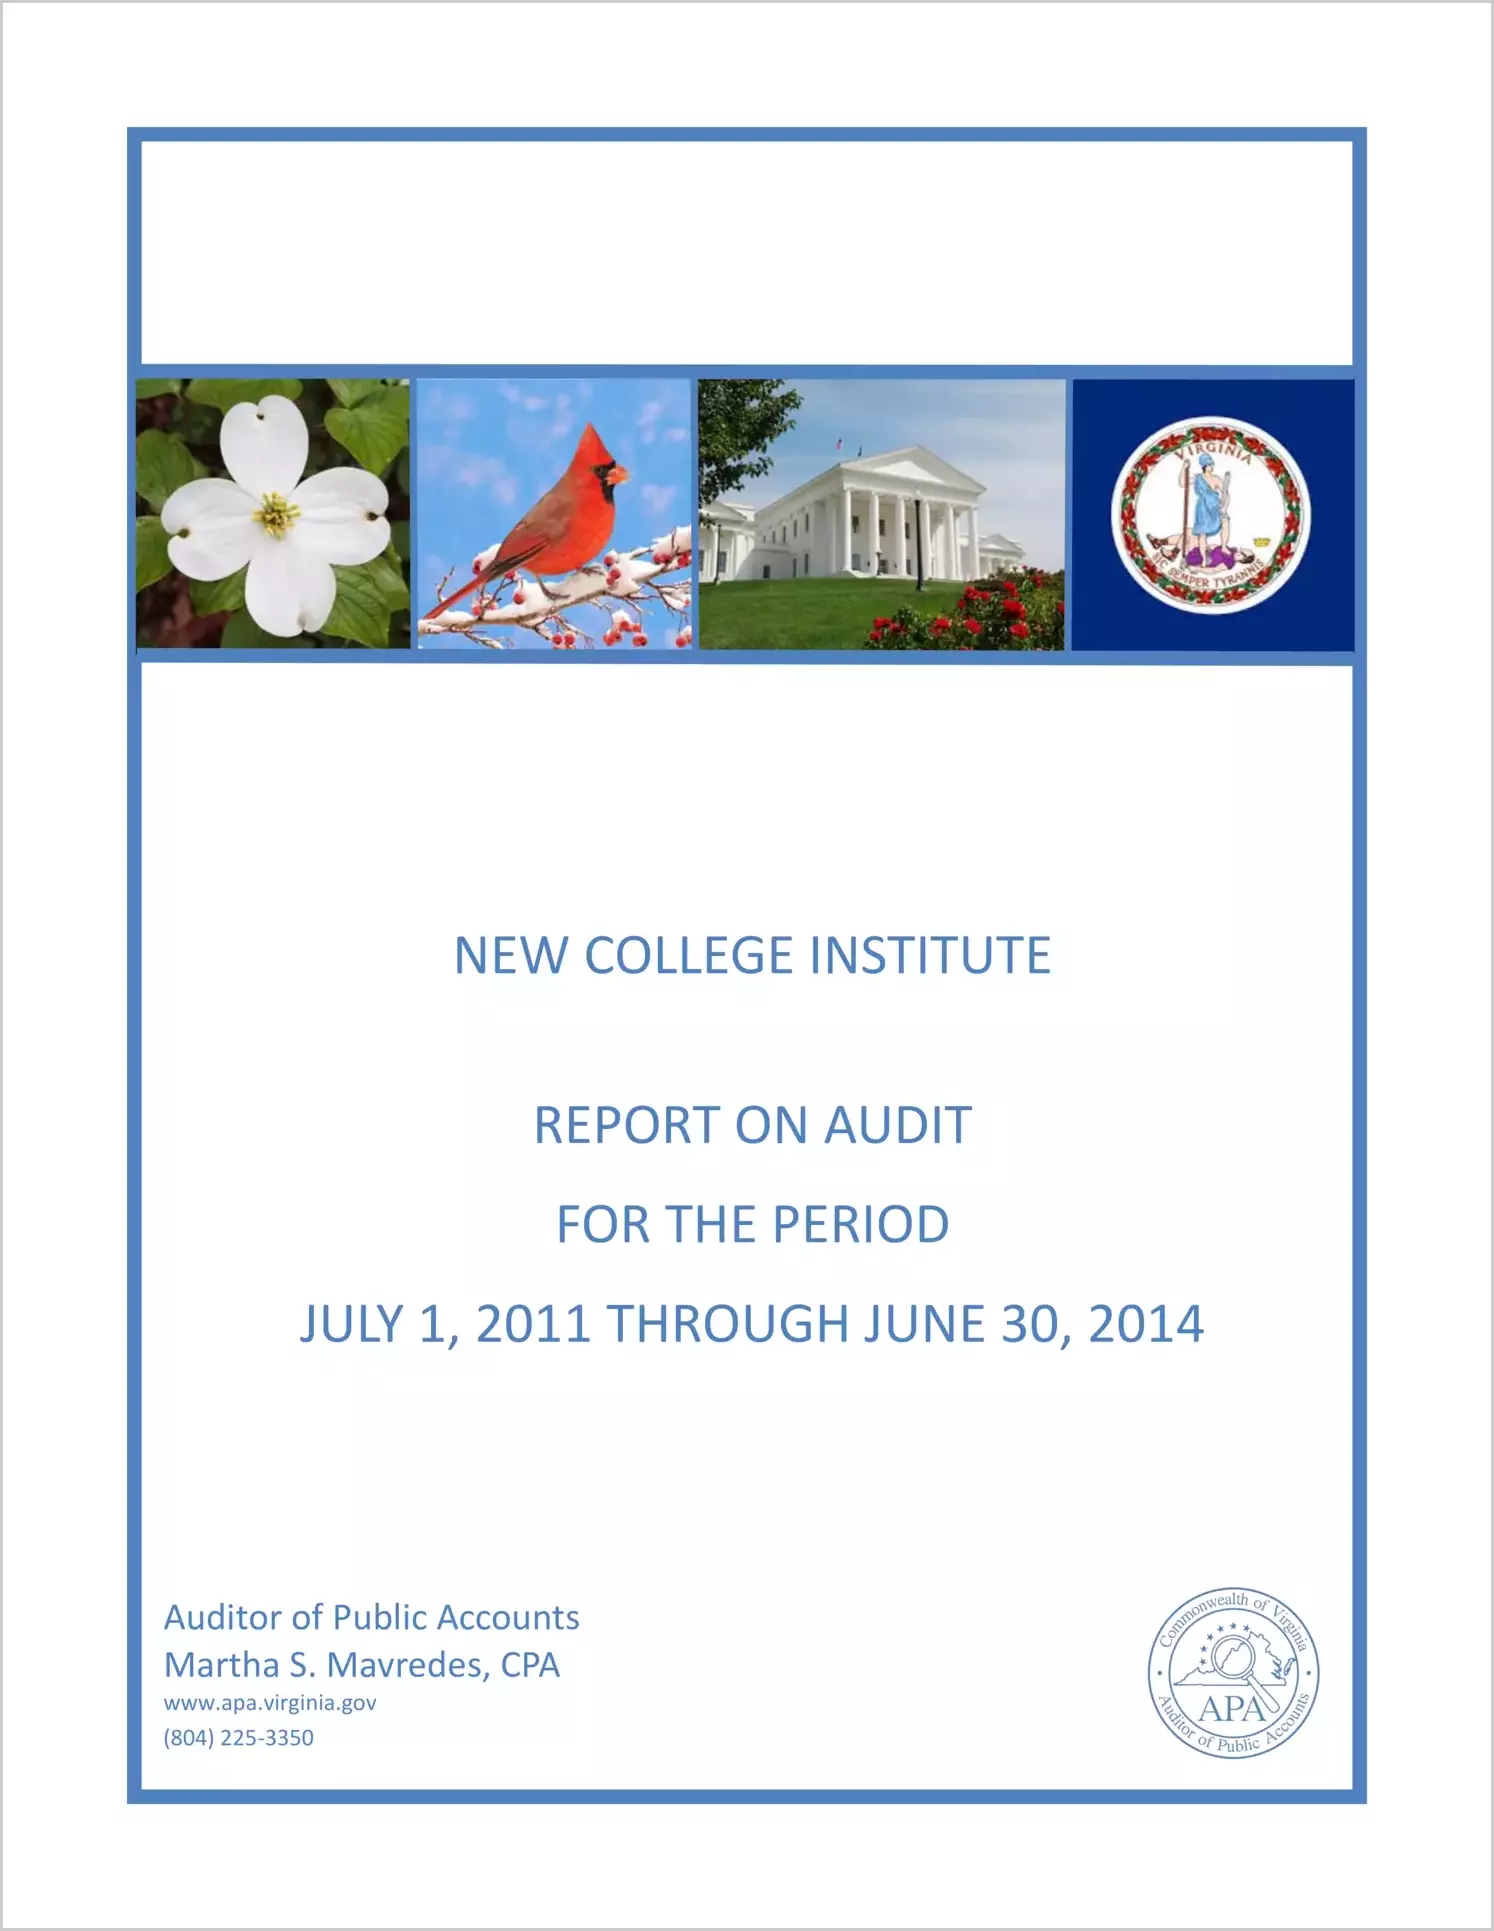 New College Institute Report on Audit for the period July 1, 2011 through June 30, 2014